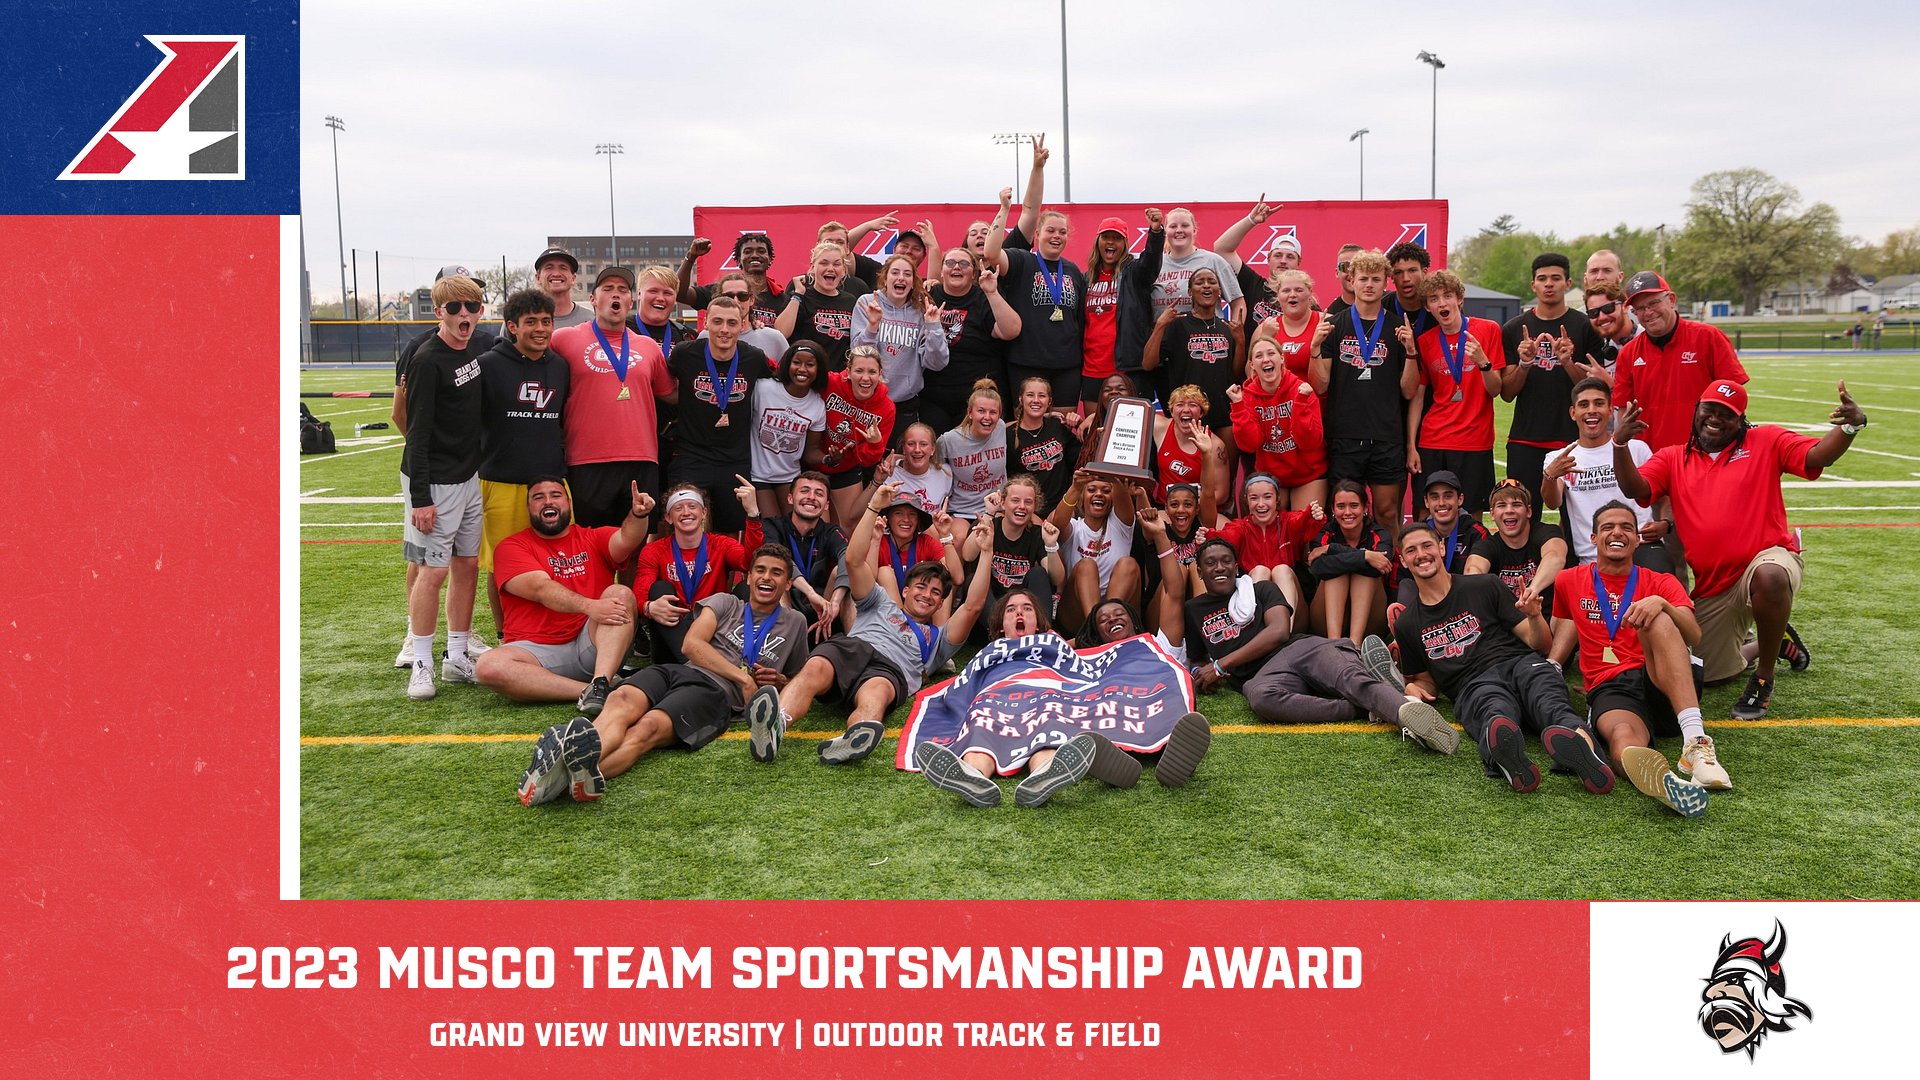 Grand View University Selected 2023 Musco Team Sportsmanship Award for Outdoor Track &amp; Field